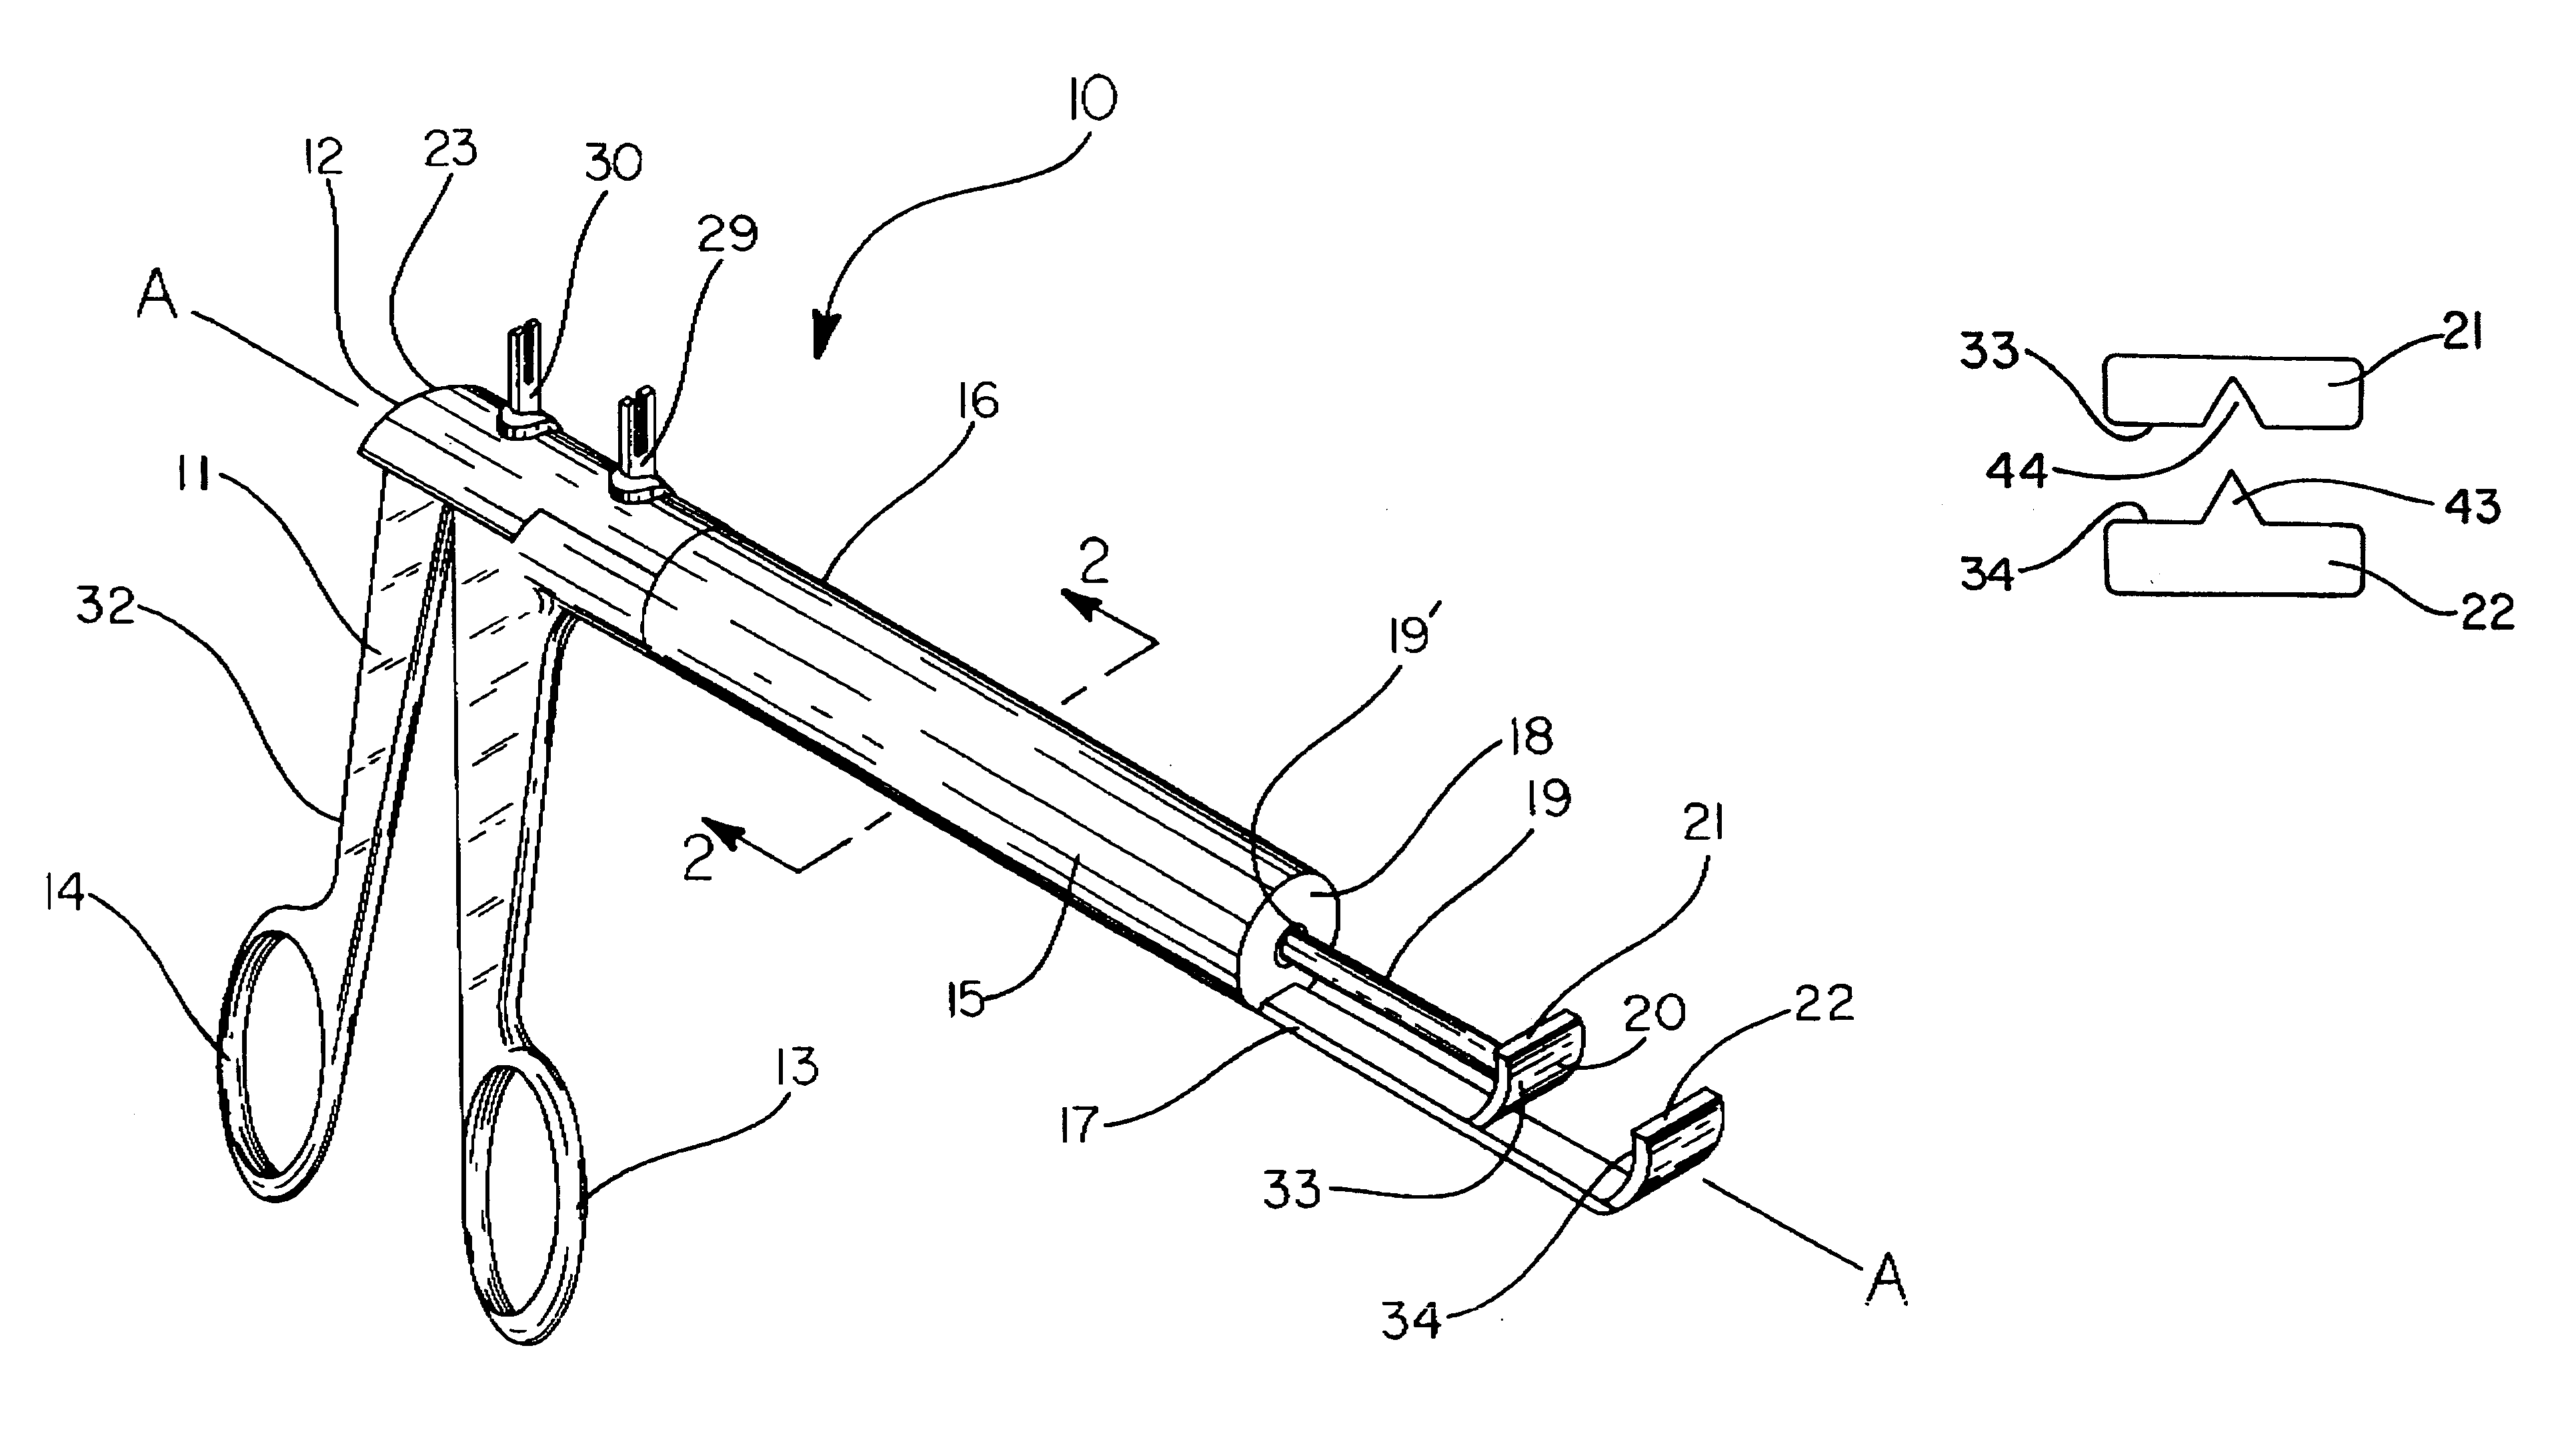 Apparatus and method for sealing and cutting tissue